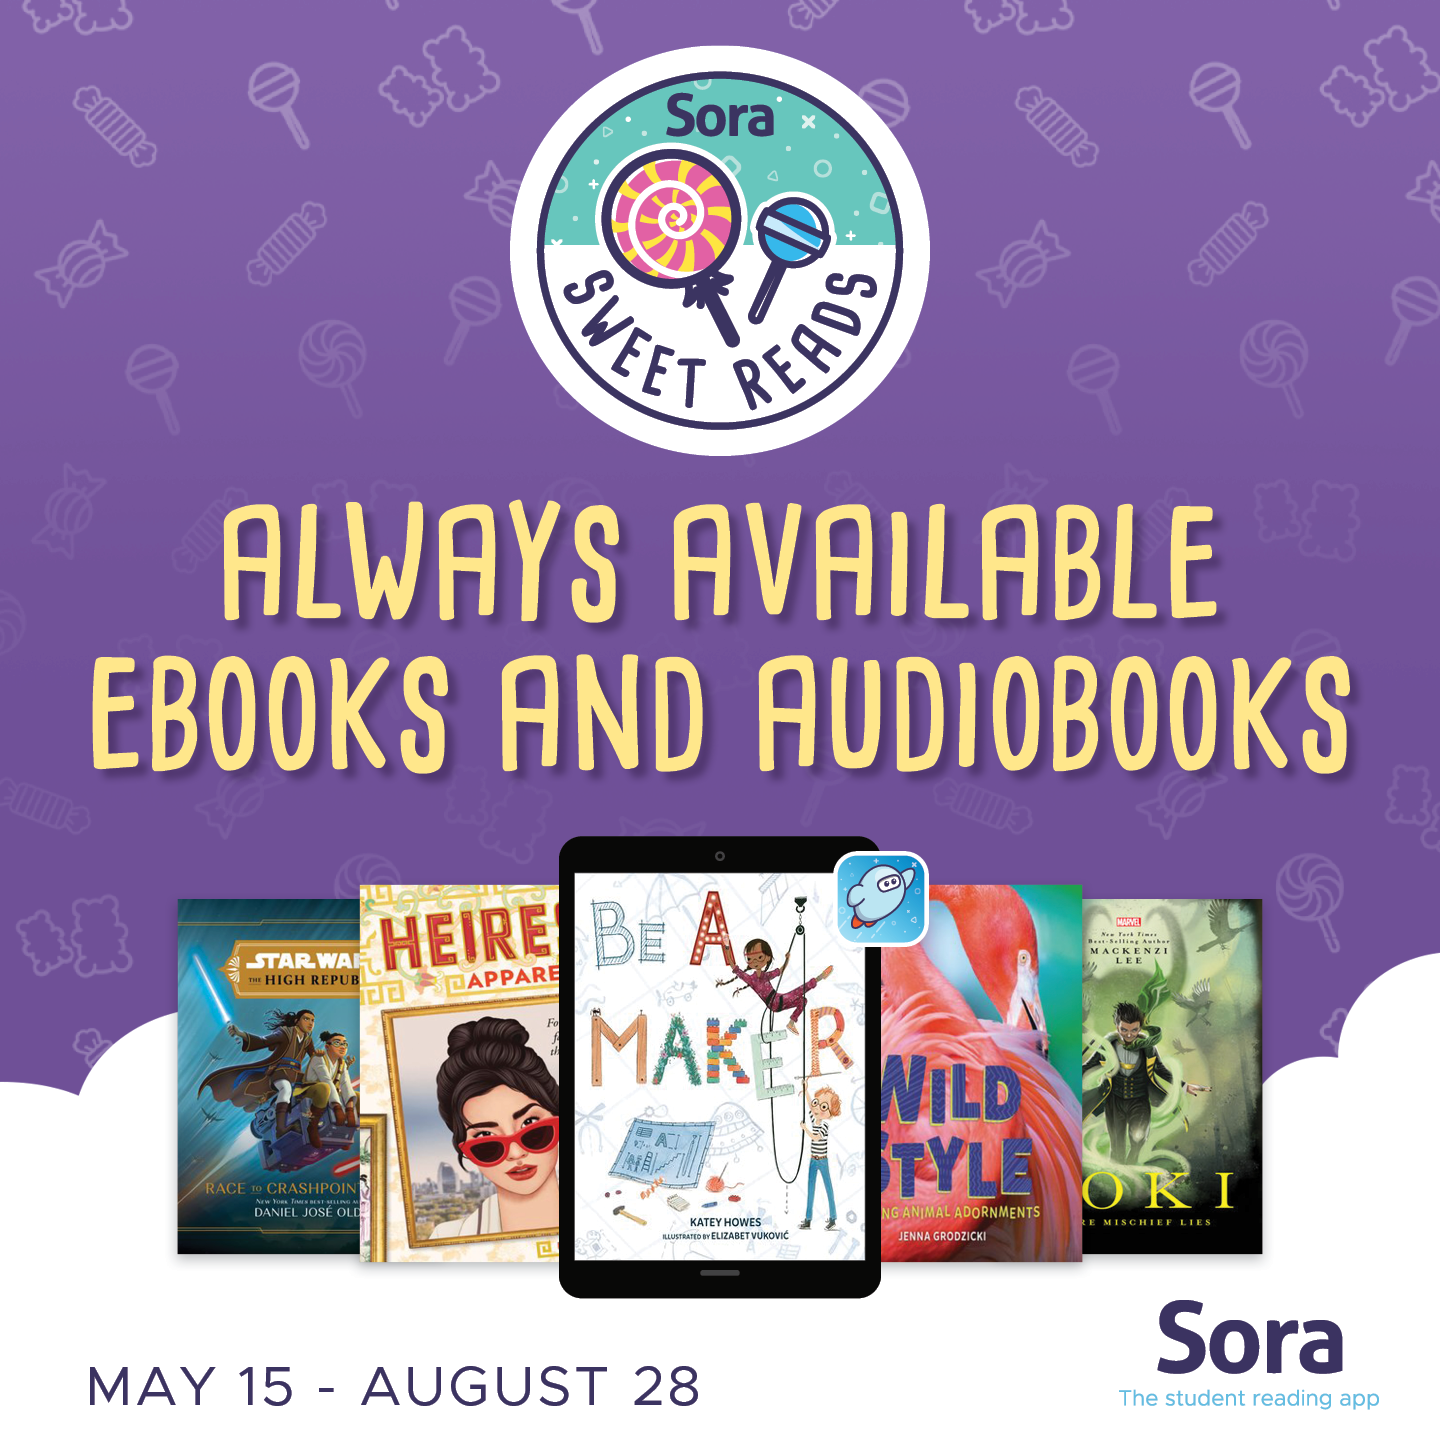 Read for free in Sora this summer with Sora Sweet Reads, a free summer reading program meant to keep students borrowing books while on break.